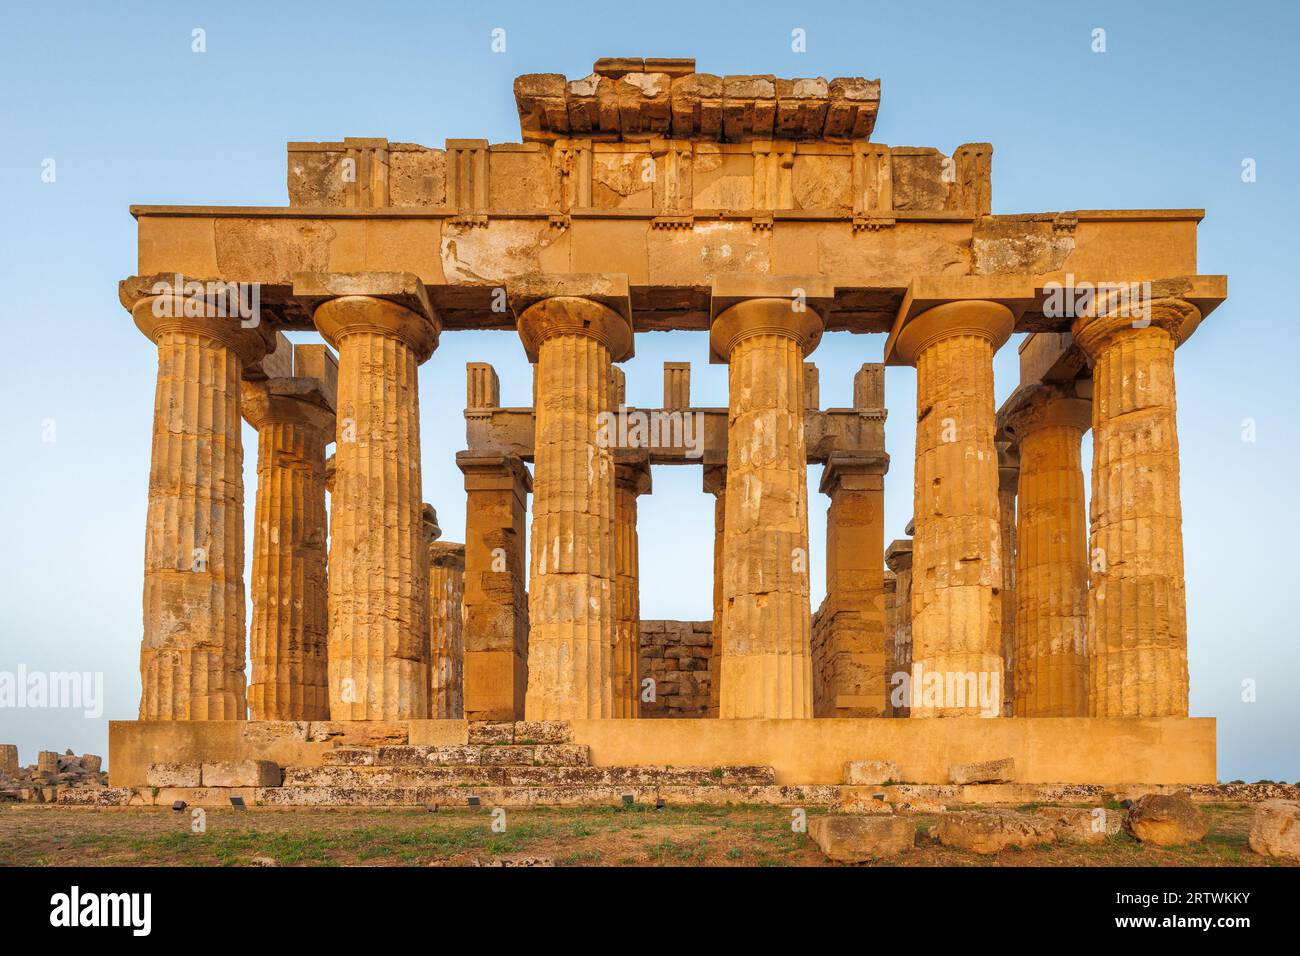 Temple of Hera in Selinunte at sunset. The archaeological site at Sicily, Italy, Europe. Stock Photo